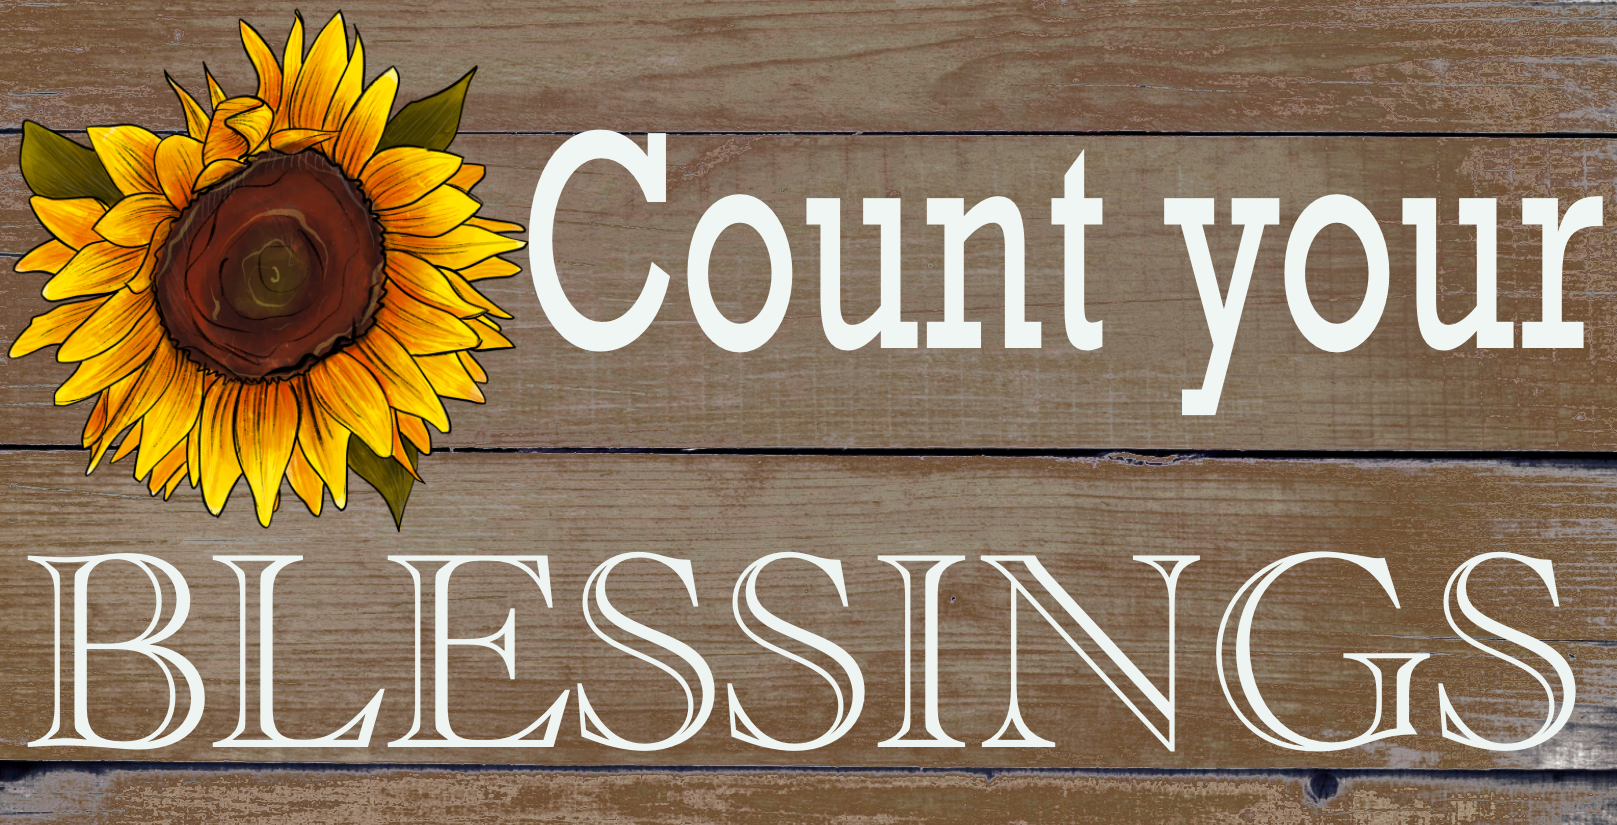 count your blessings sign